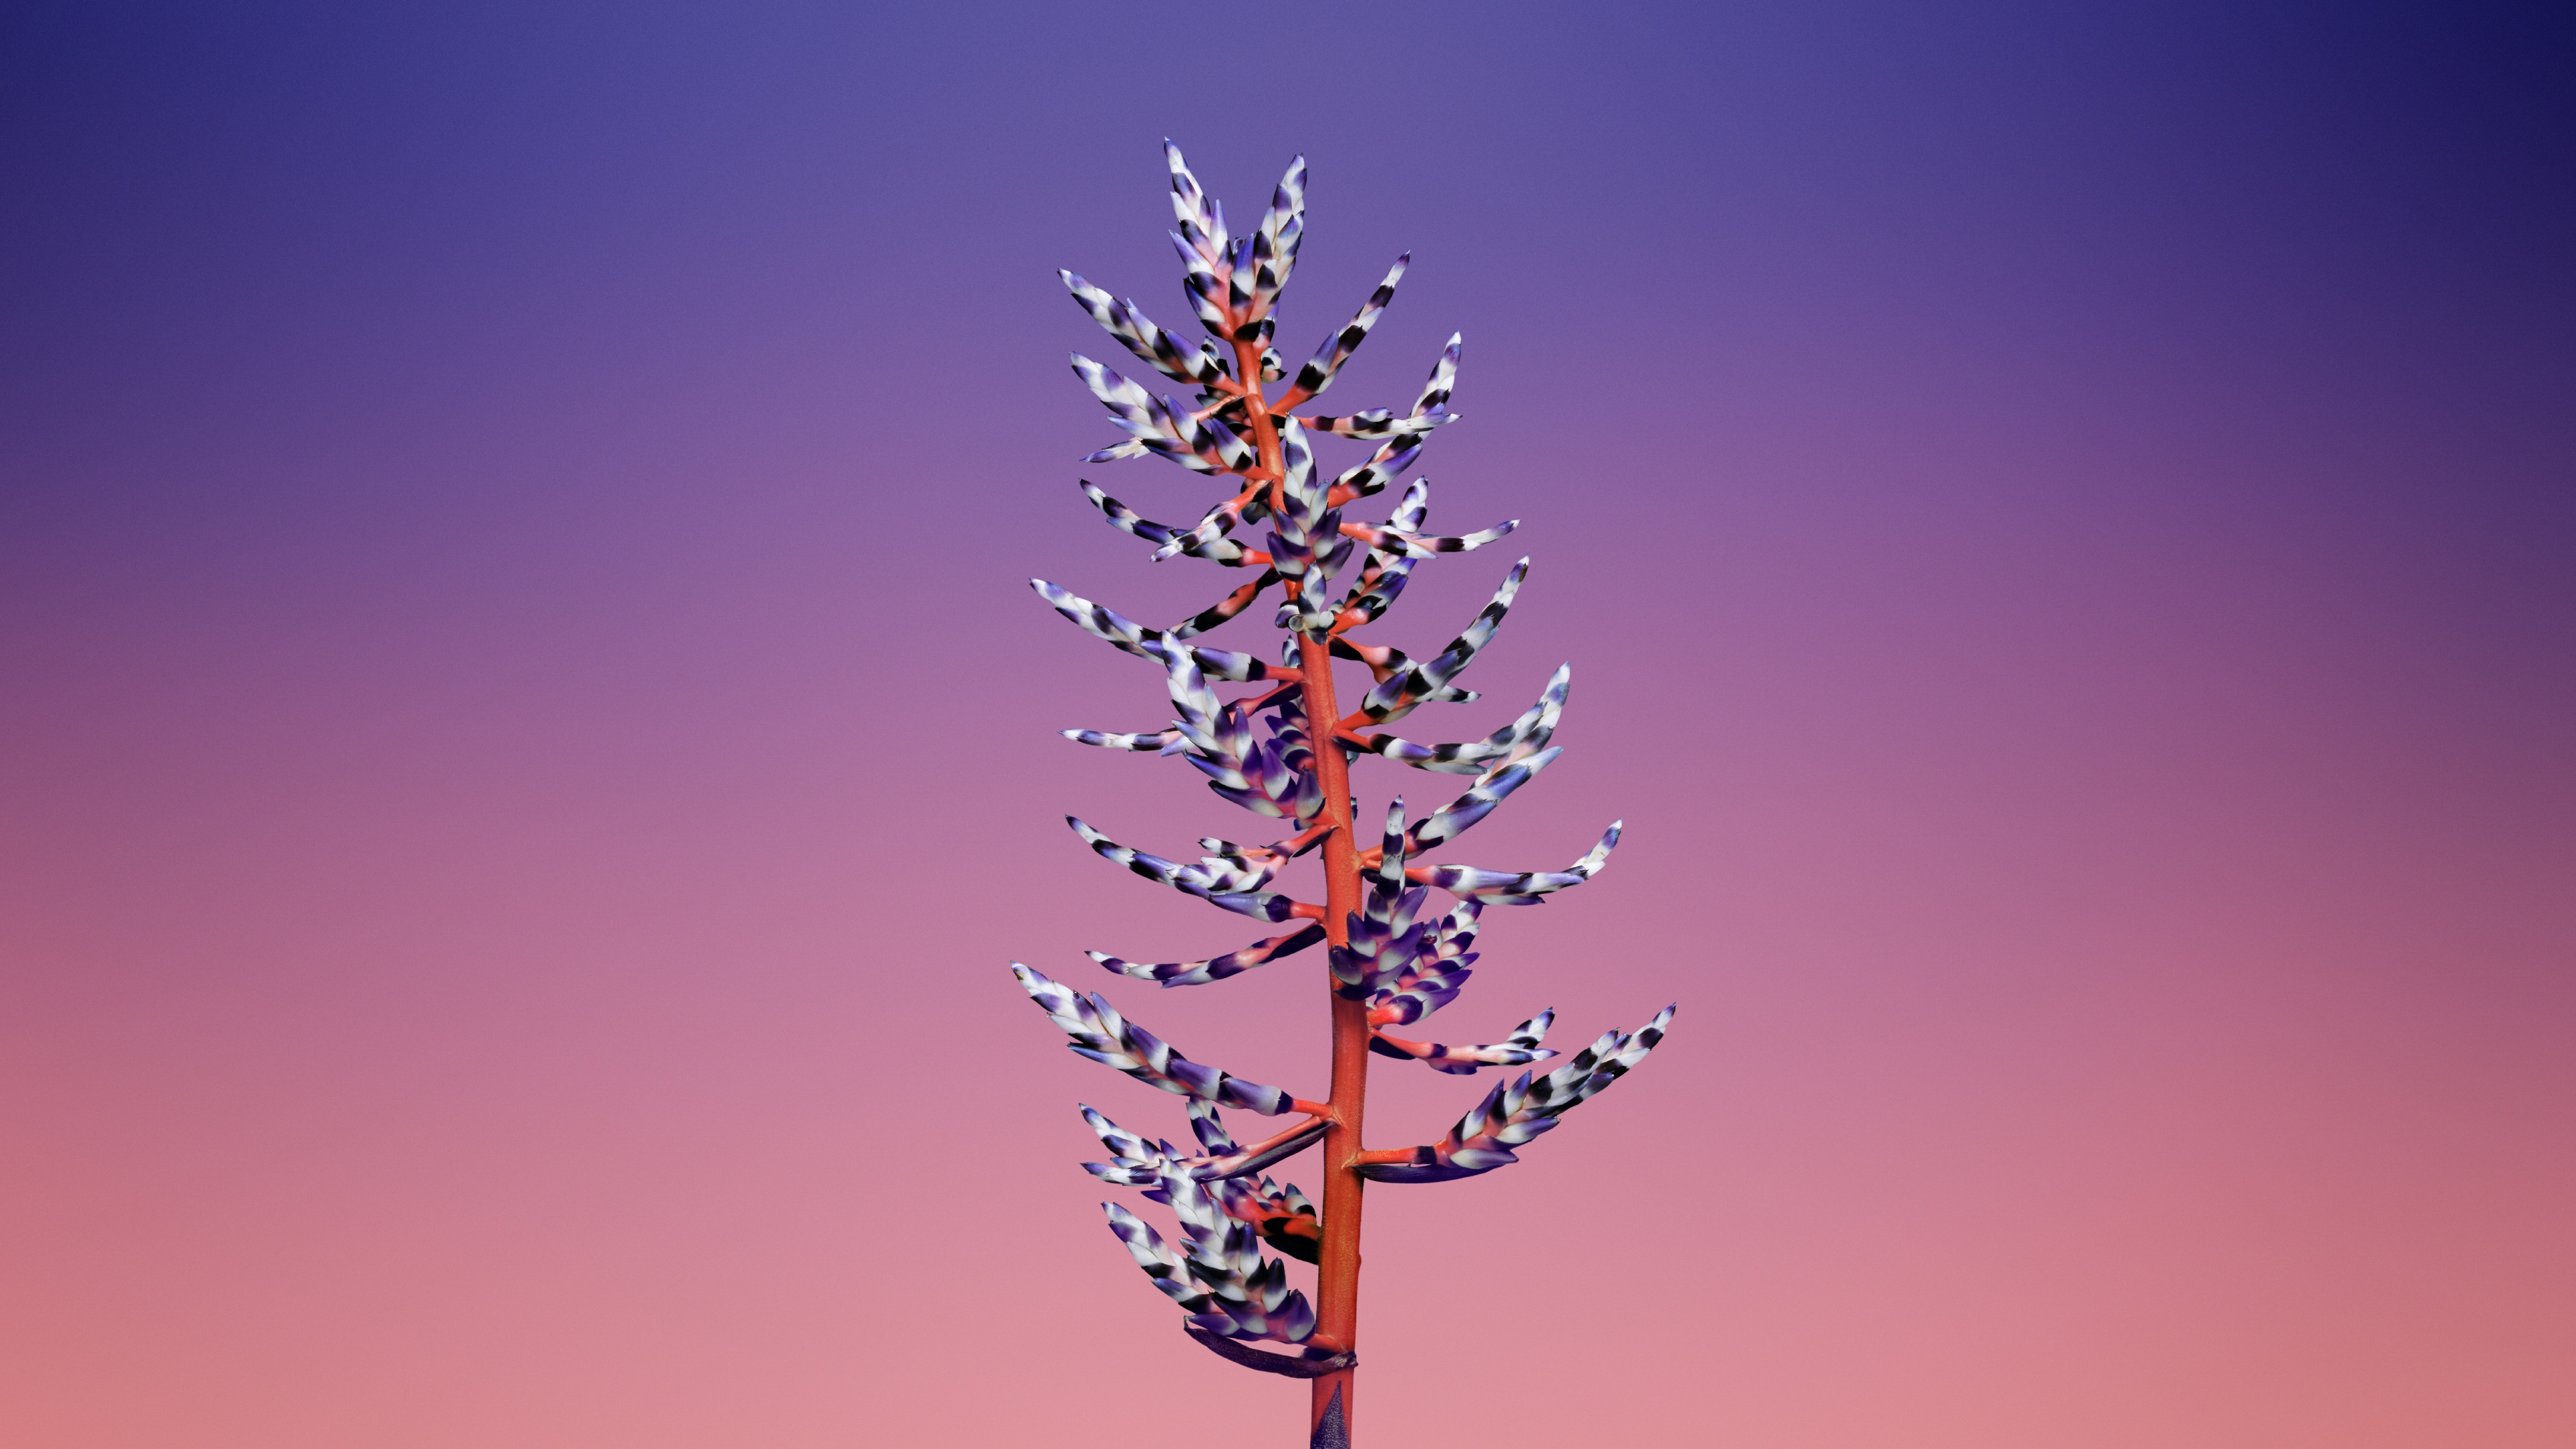 Floral 4K Wallpaper, Gradient background, iOS 11, macOS Mojave, Stock